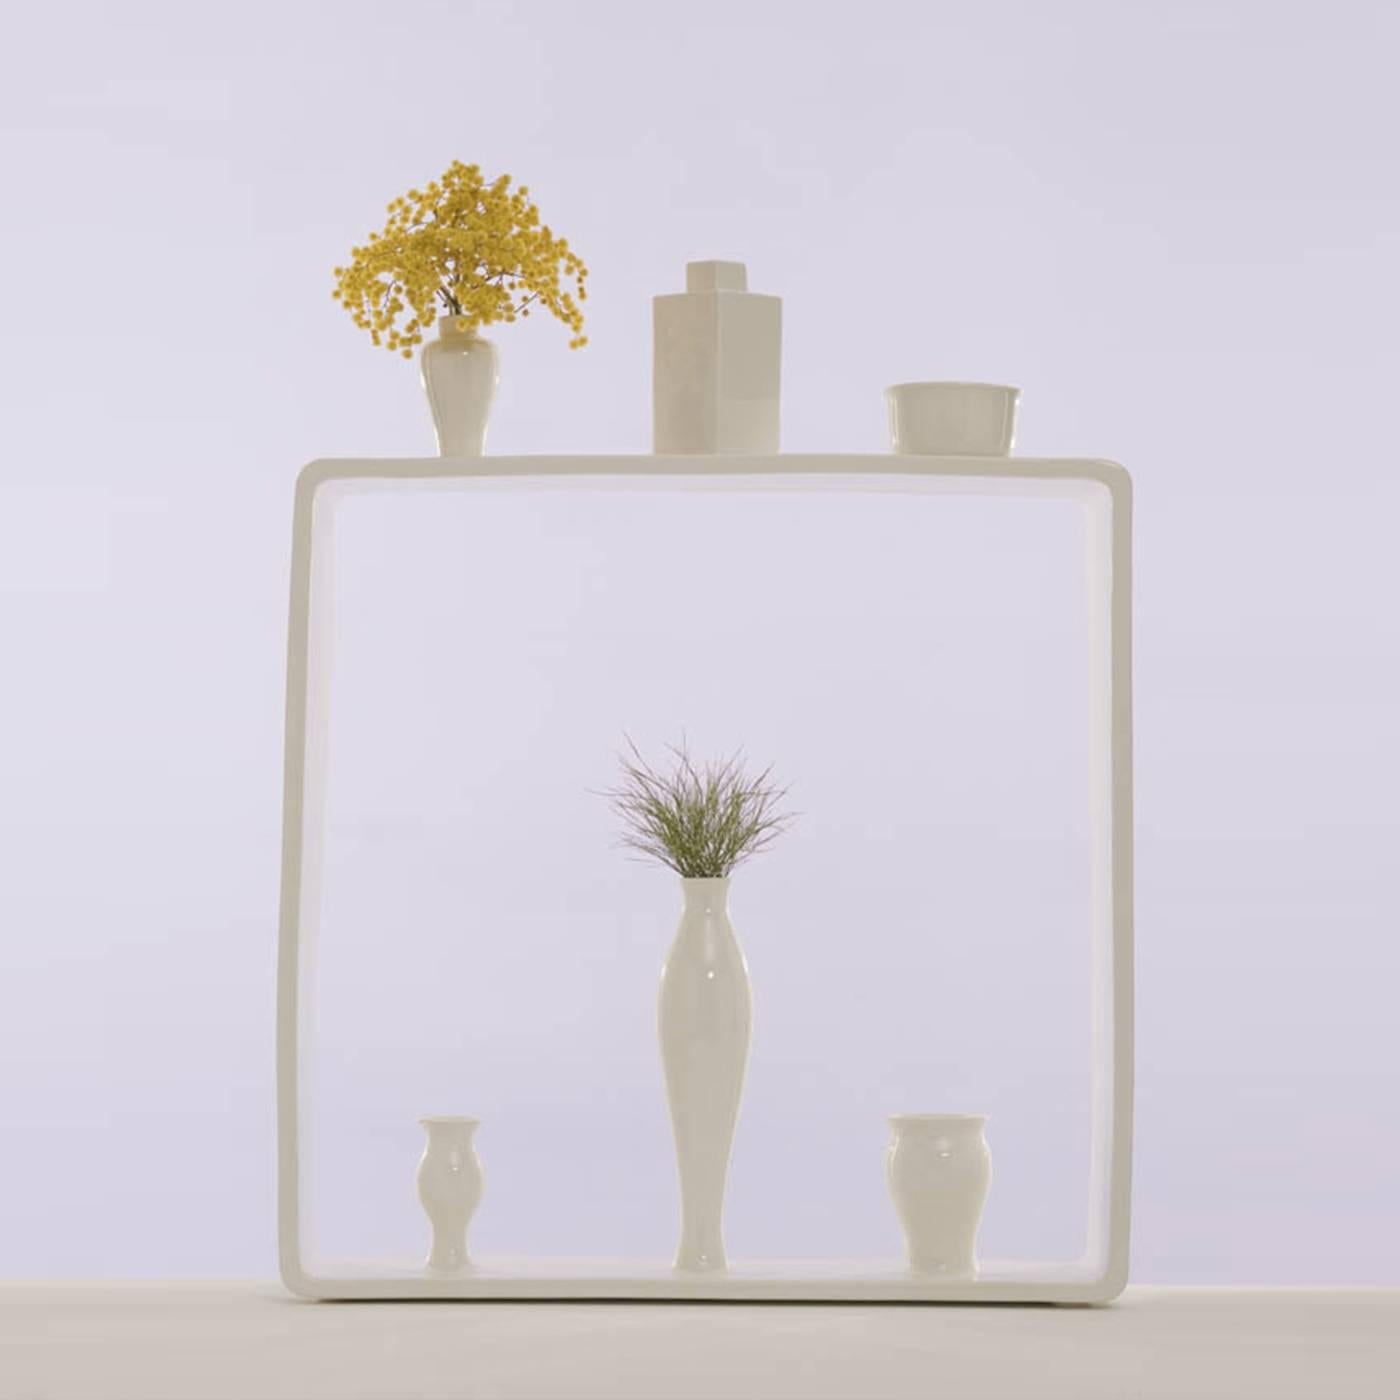 Entirely made in white ceramic, this vase is part of a limited 50-piece series, numbered and signed and created by Andrea Branzi as part of Portali, a collection of 18 vases all encapsulated within a square frame. Each vase is a micro-architecture